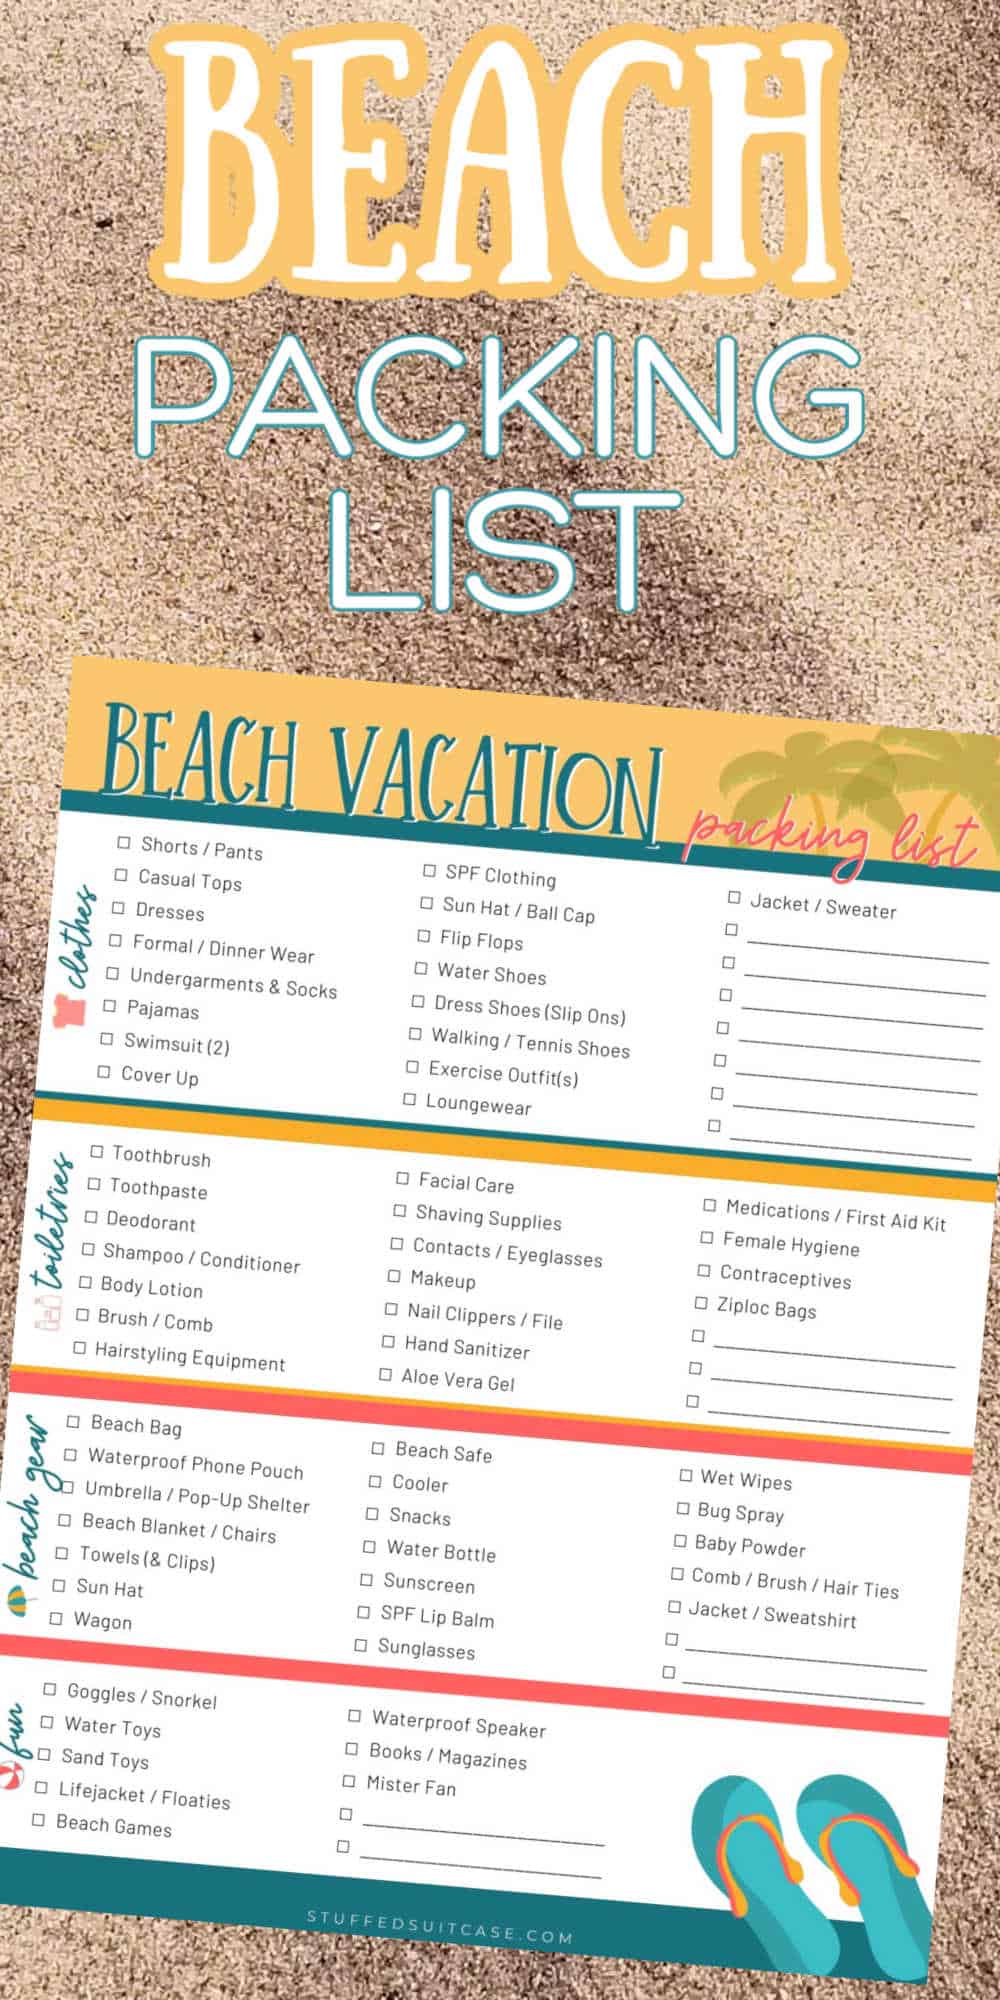 Best Beach Packing List Printable Checklist for Vacation (2020)